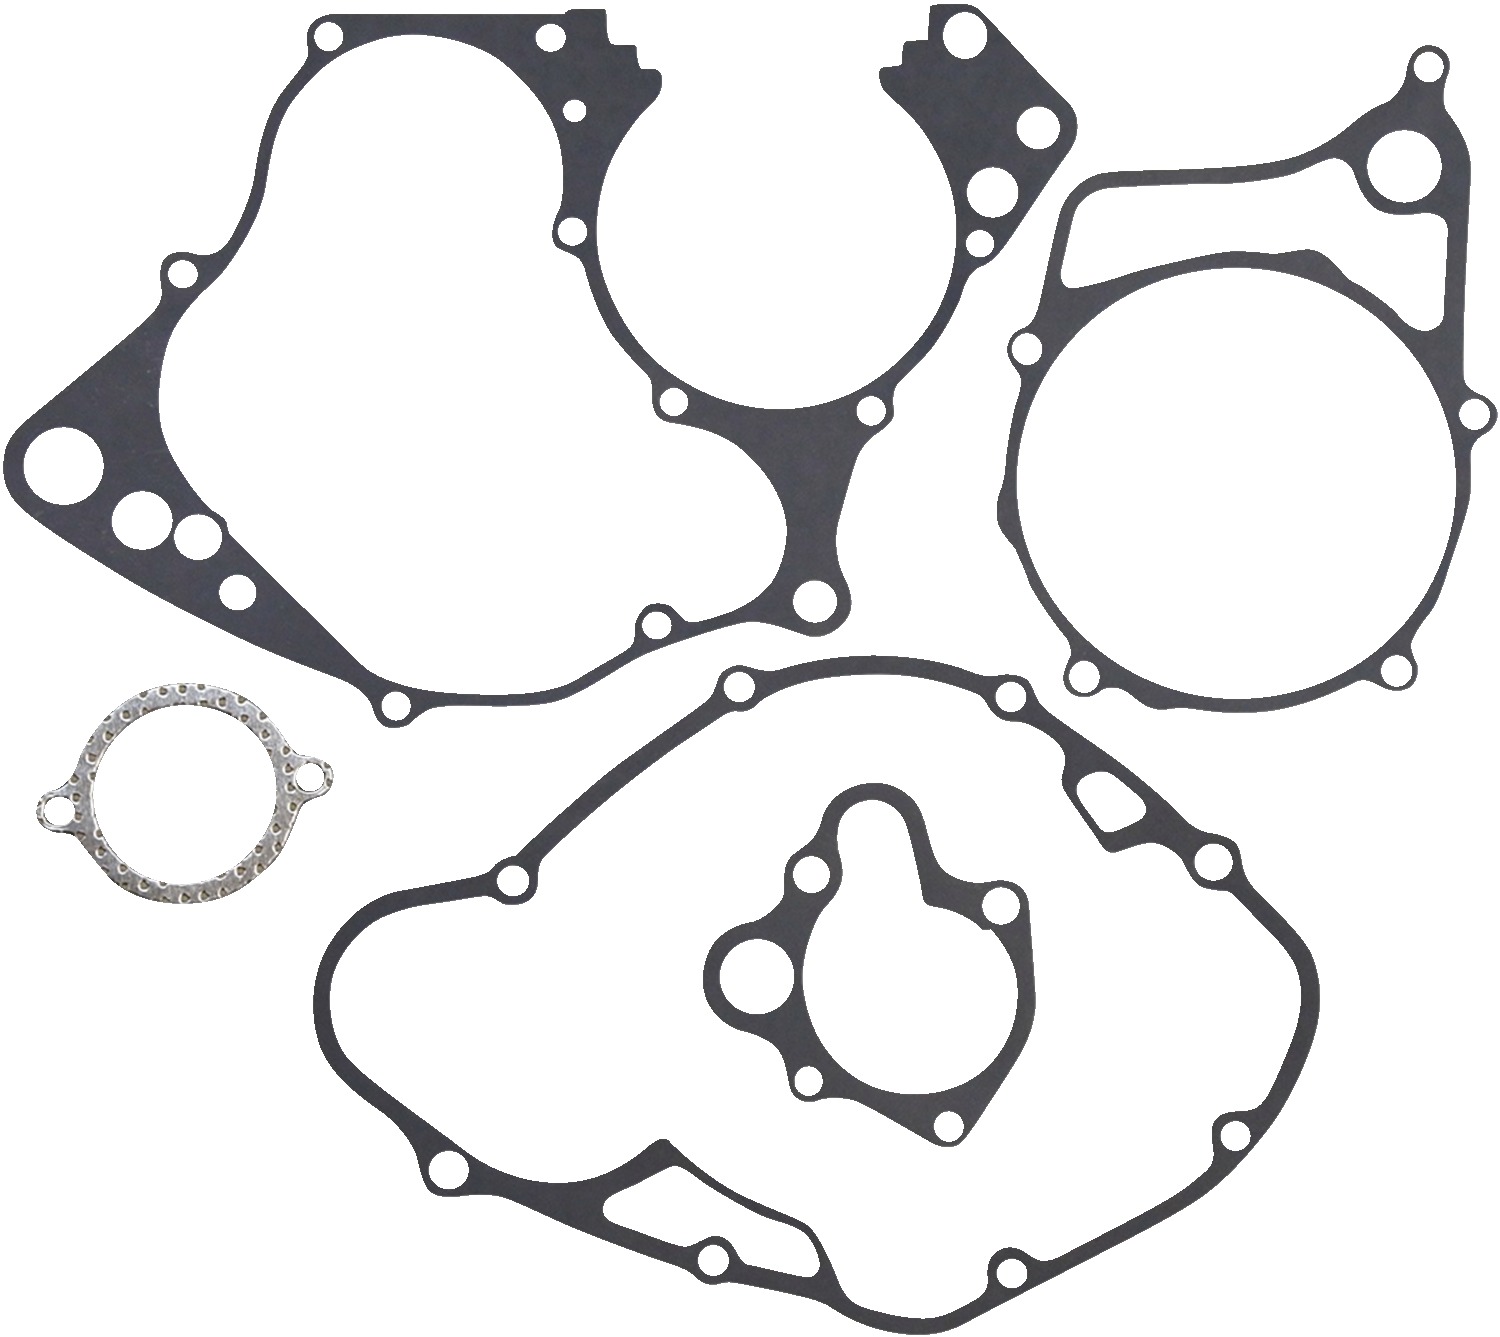 Lower Engine Gasket Kit - For 1981 Honda CR125R - Click Image to Close